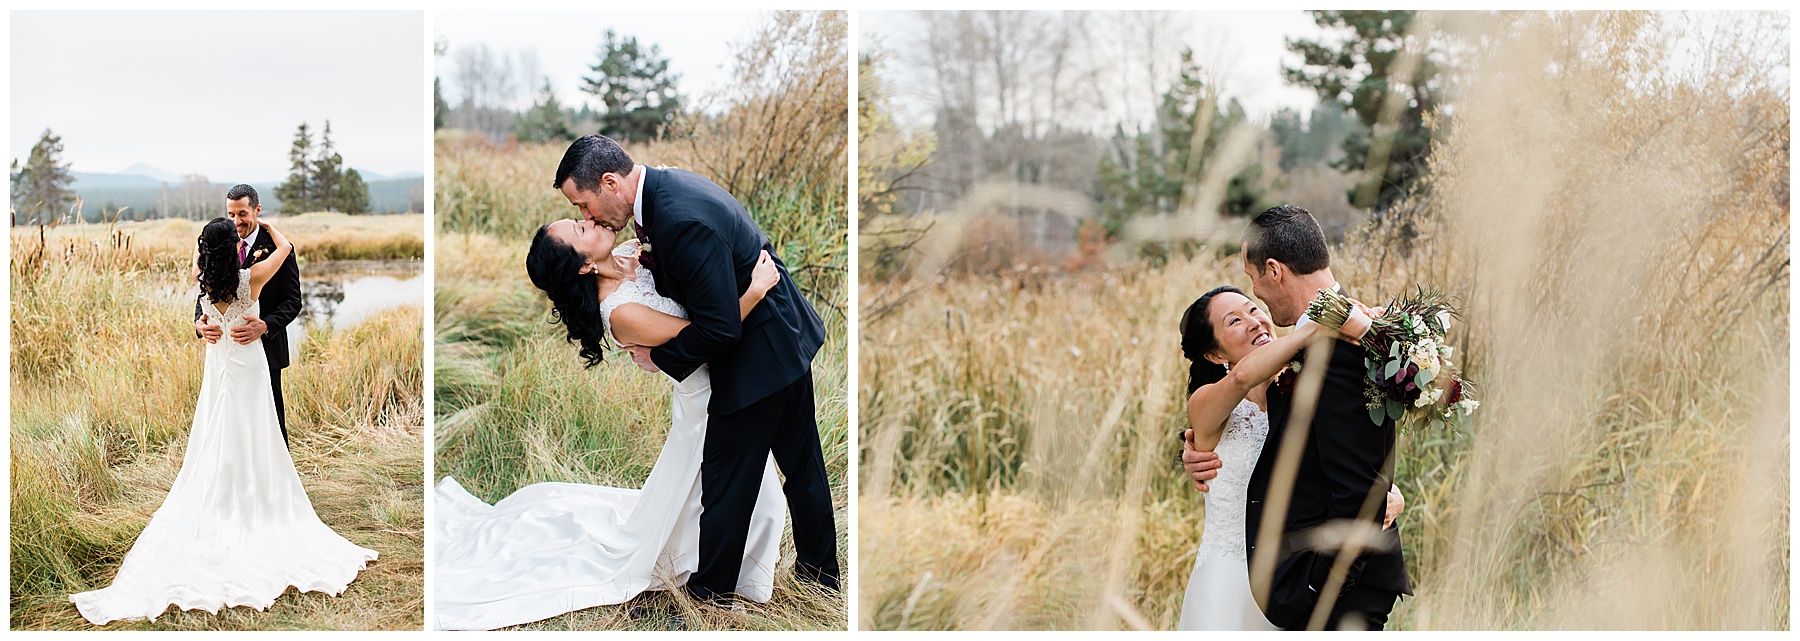 Portrait of the couple in the fall foliage at the Sunriver Resort Riverfront